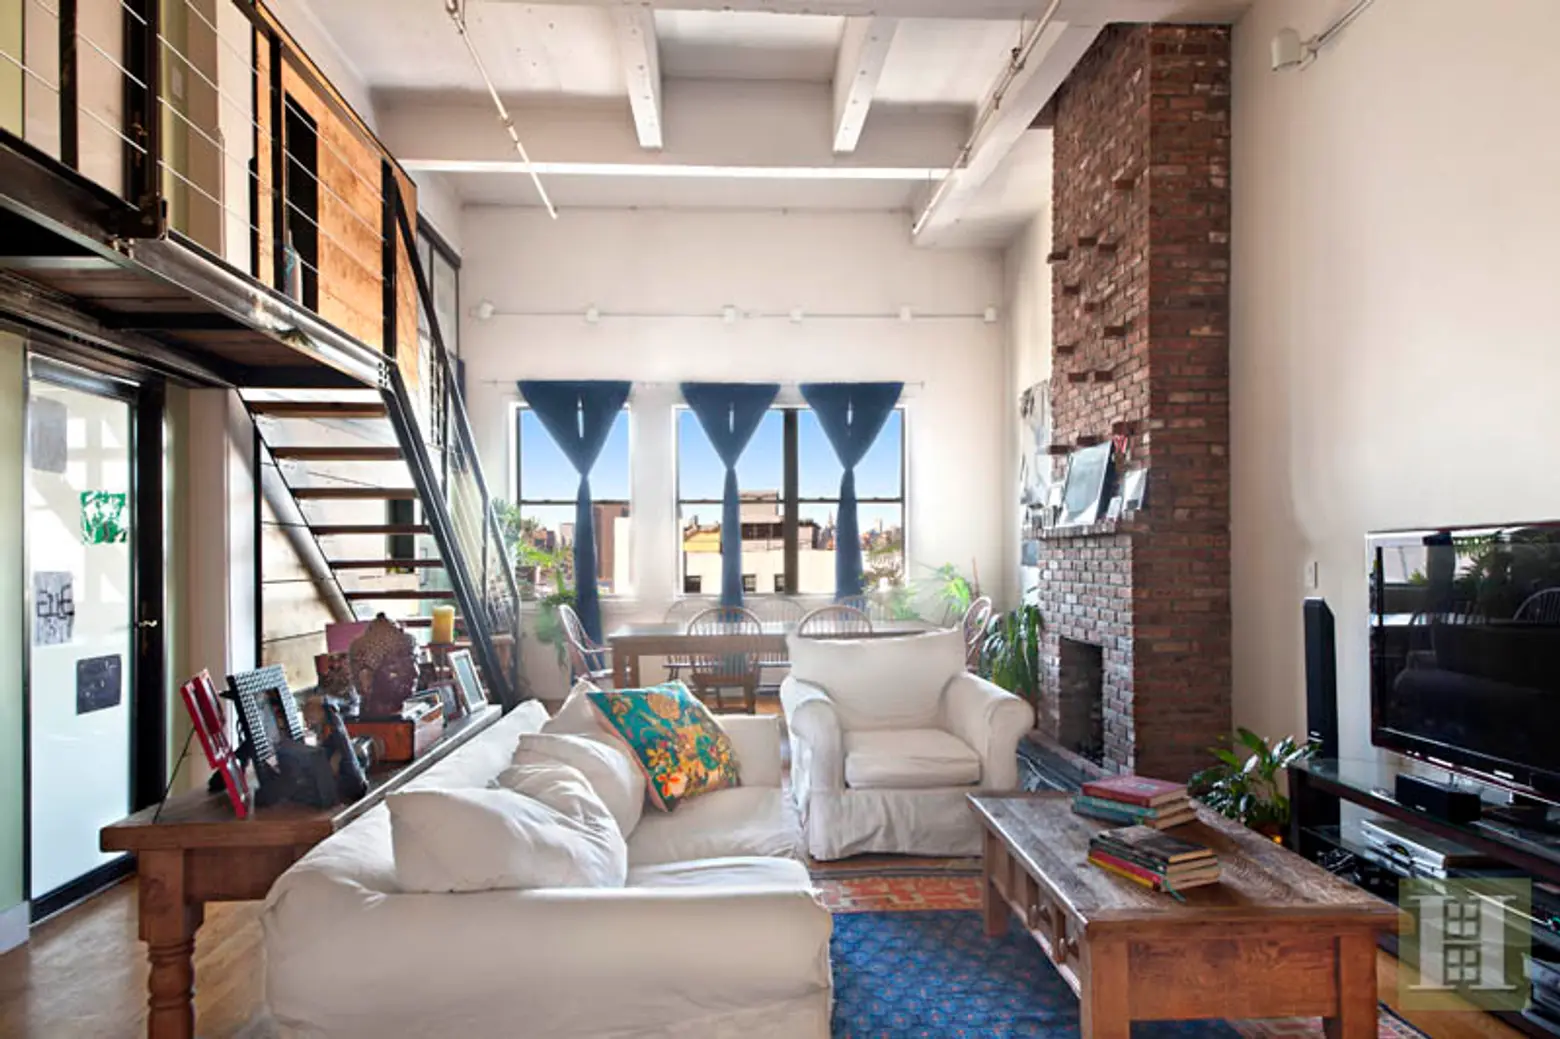 Bask in Manhattan Views from the Roof Deck of This $2.4M DUMBO Loft